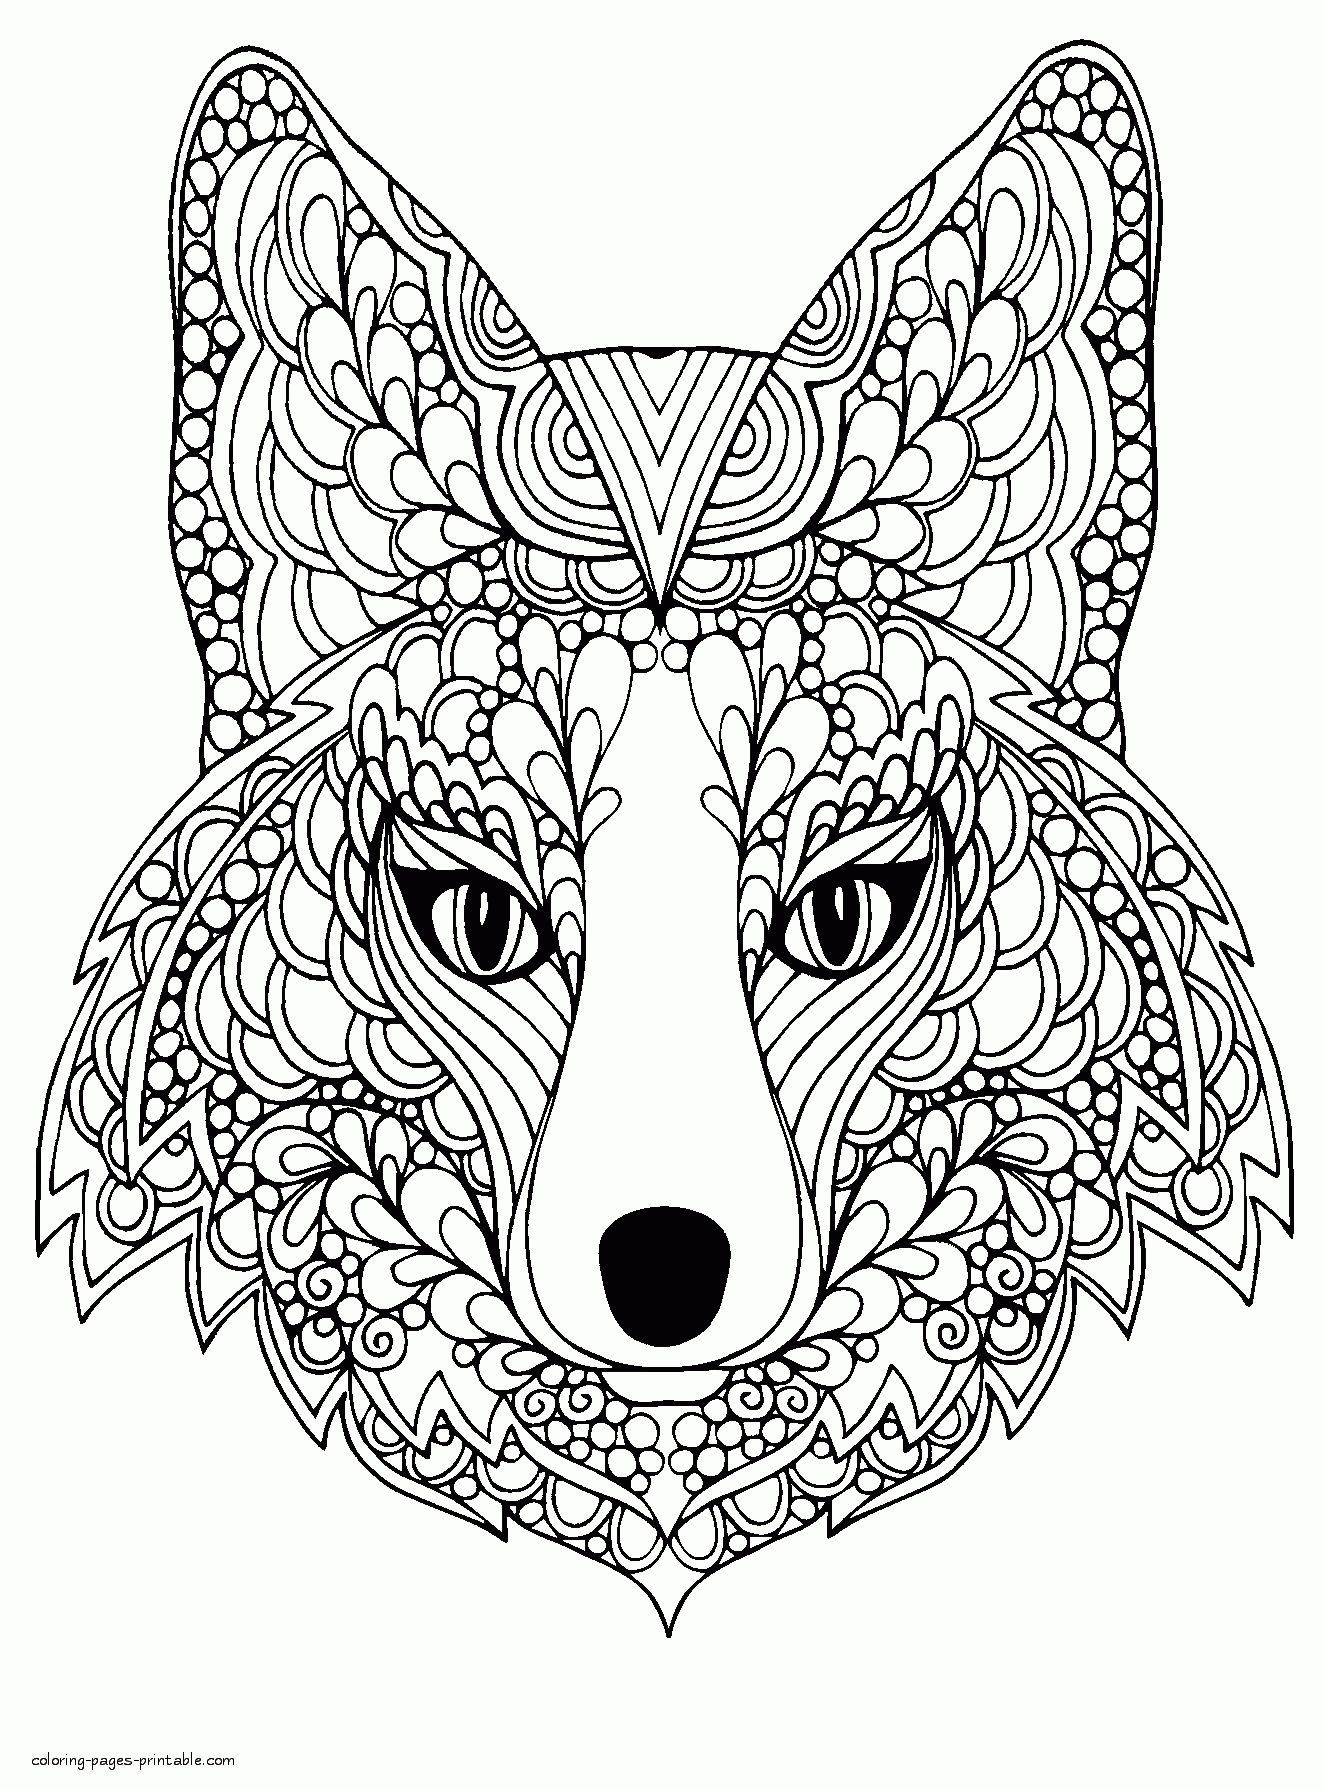 Printable Fox Coloring Sheet    COLORING PAGES PRINTABLE.COM